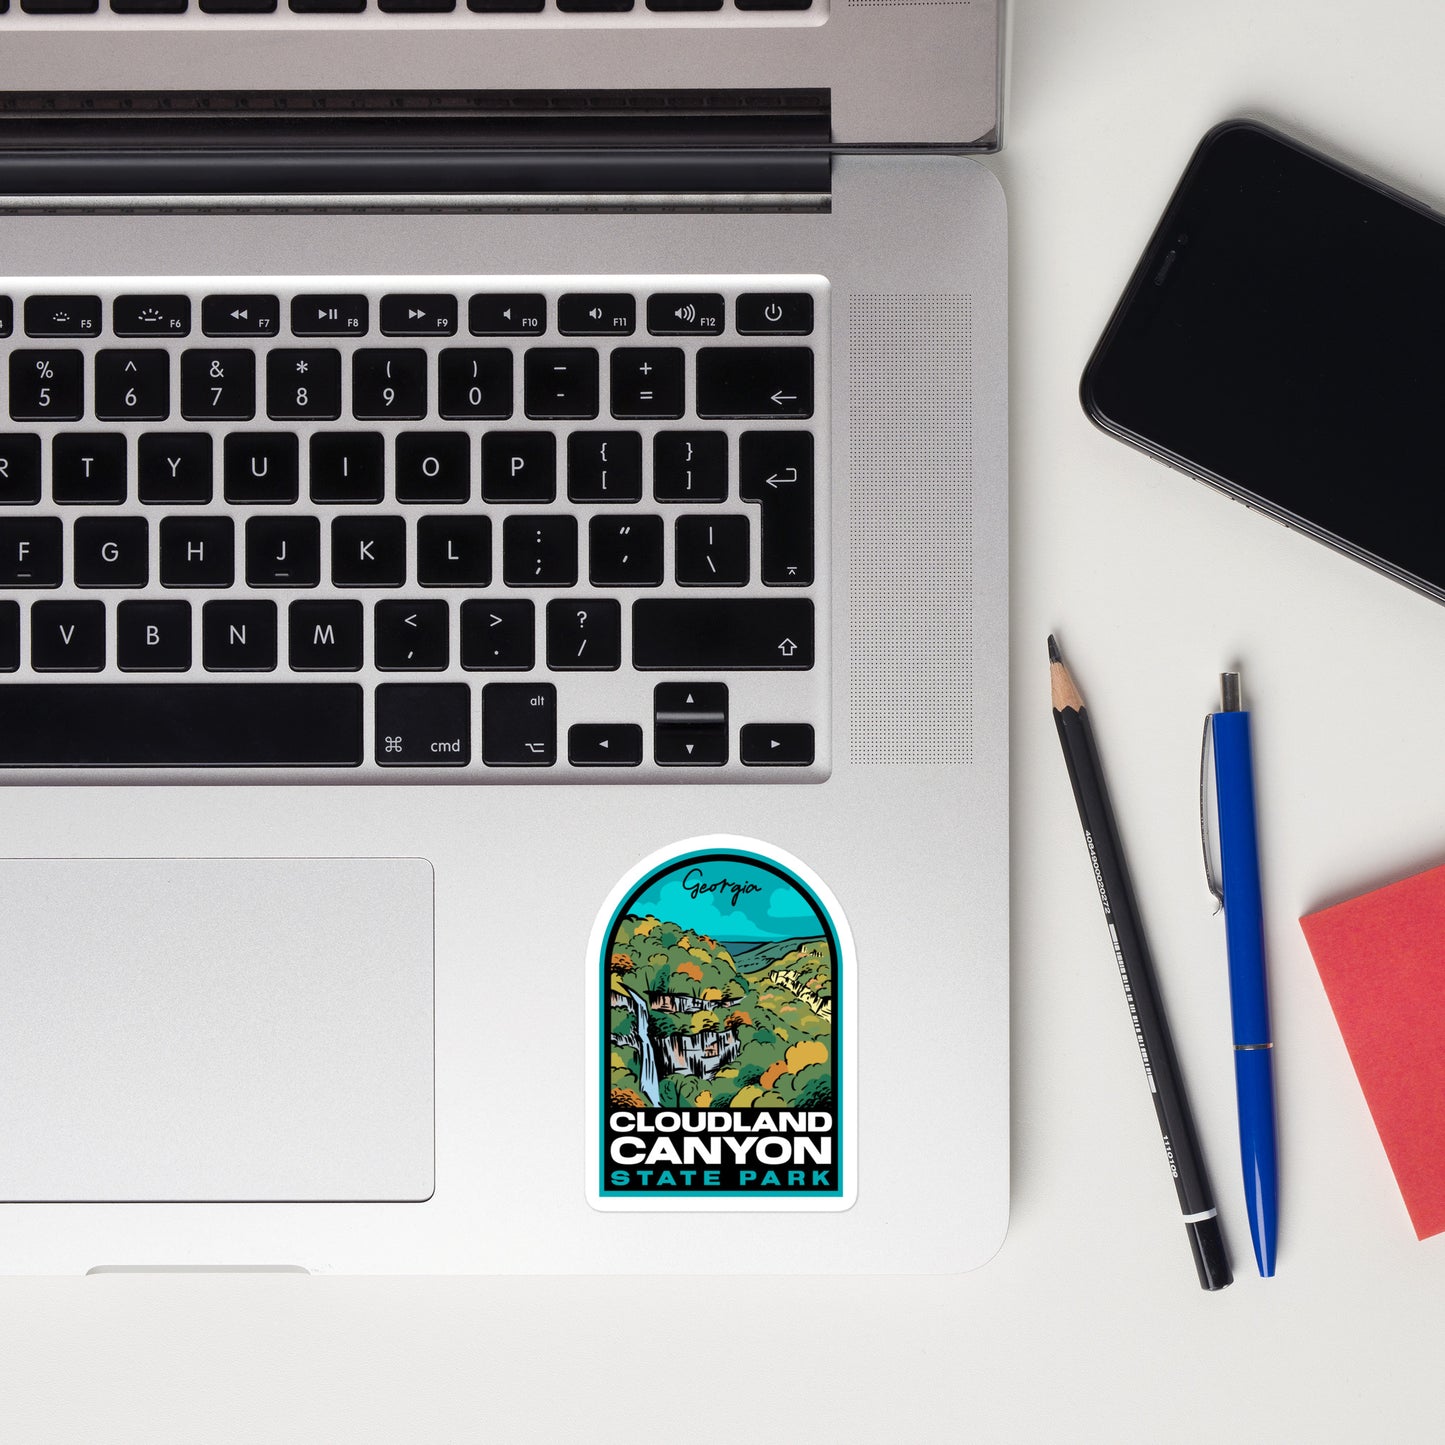 A sticker of Cloudland Canyon State Park on a laptop